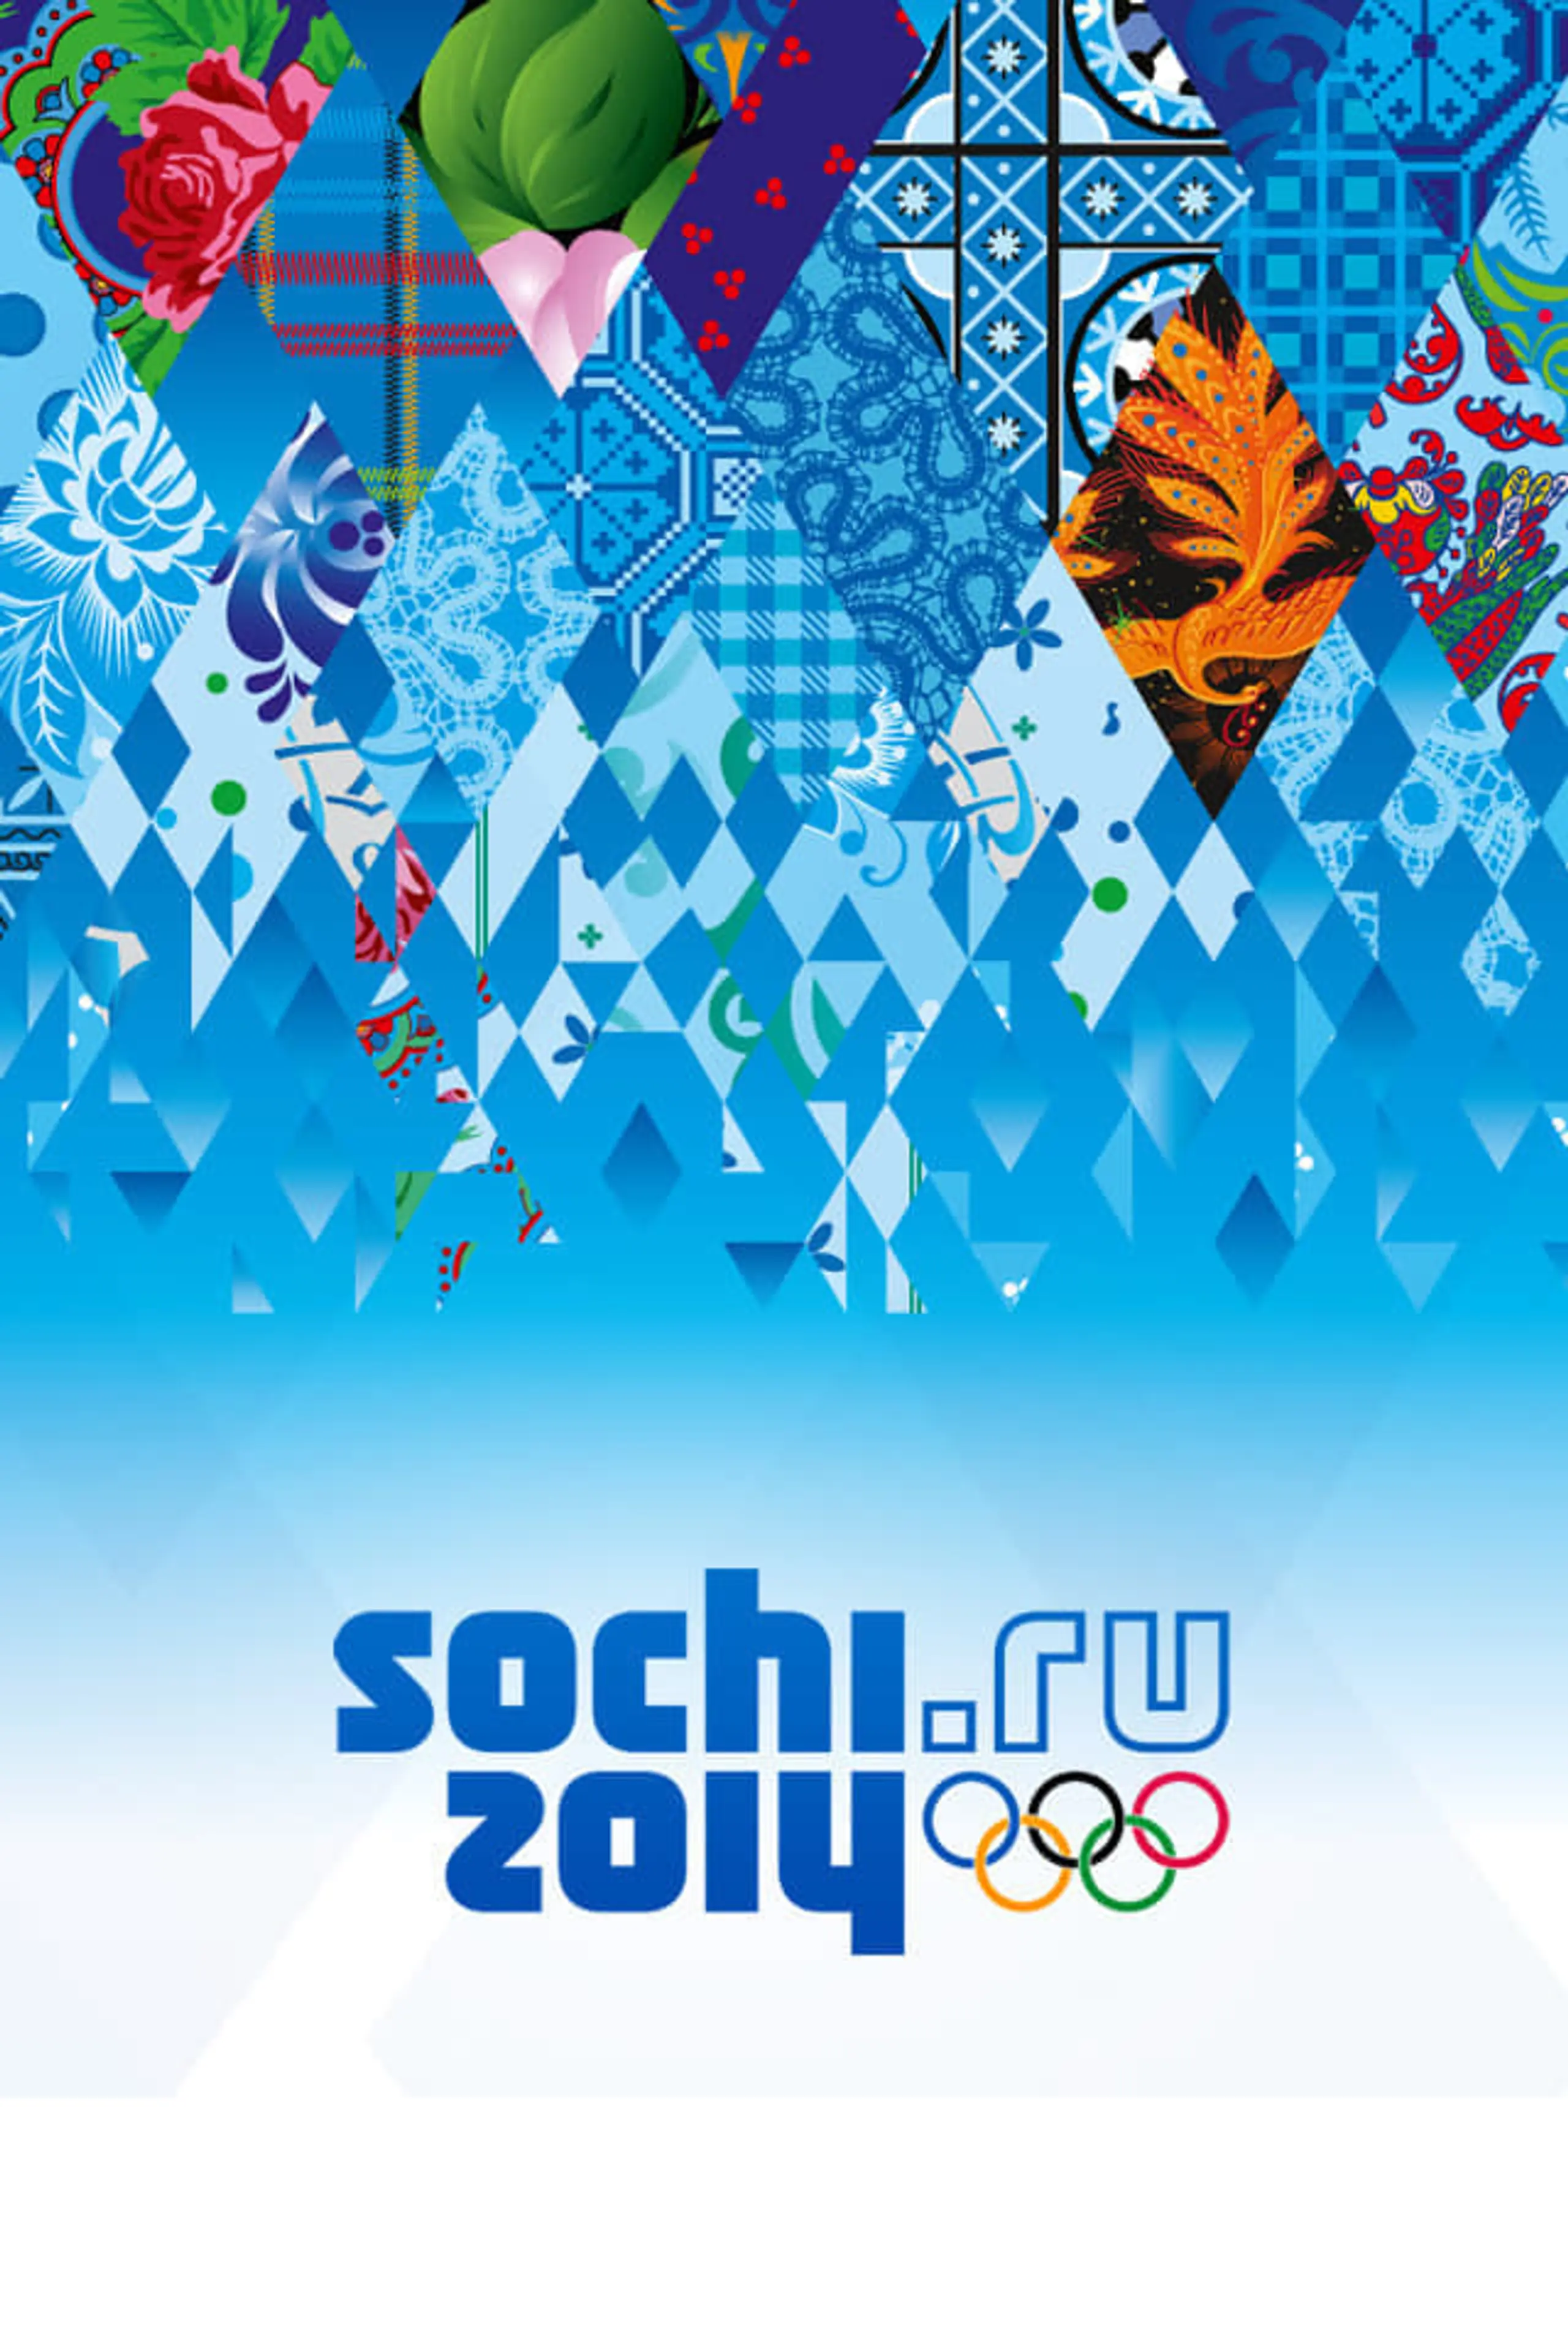 Sochi 2014 Olympic Opening Ceremony: Dreams of Russia